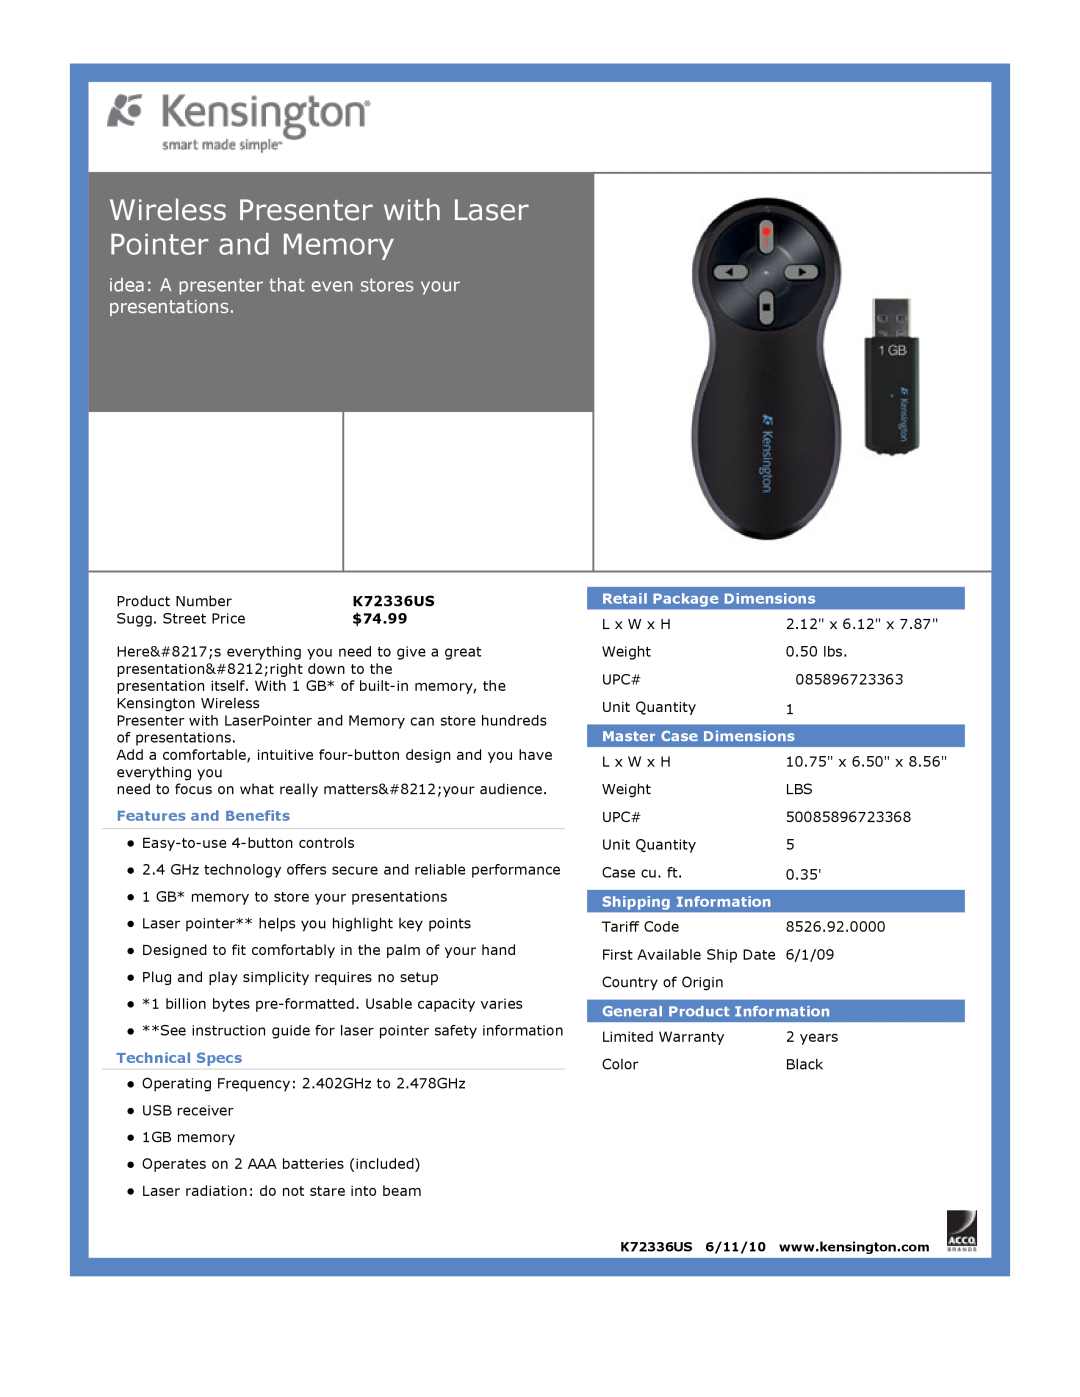 Kensington k72336us dimensions Wireless Presenter with Laser Pointer and Memory, $74.99, Features and Benefits 